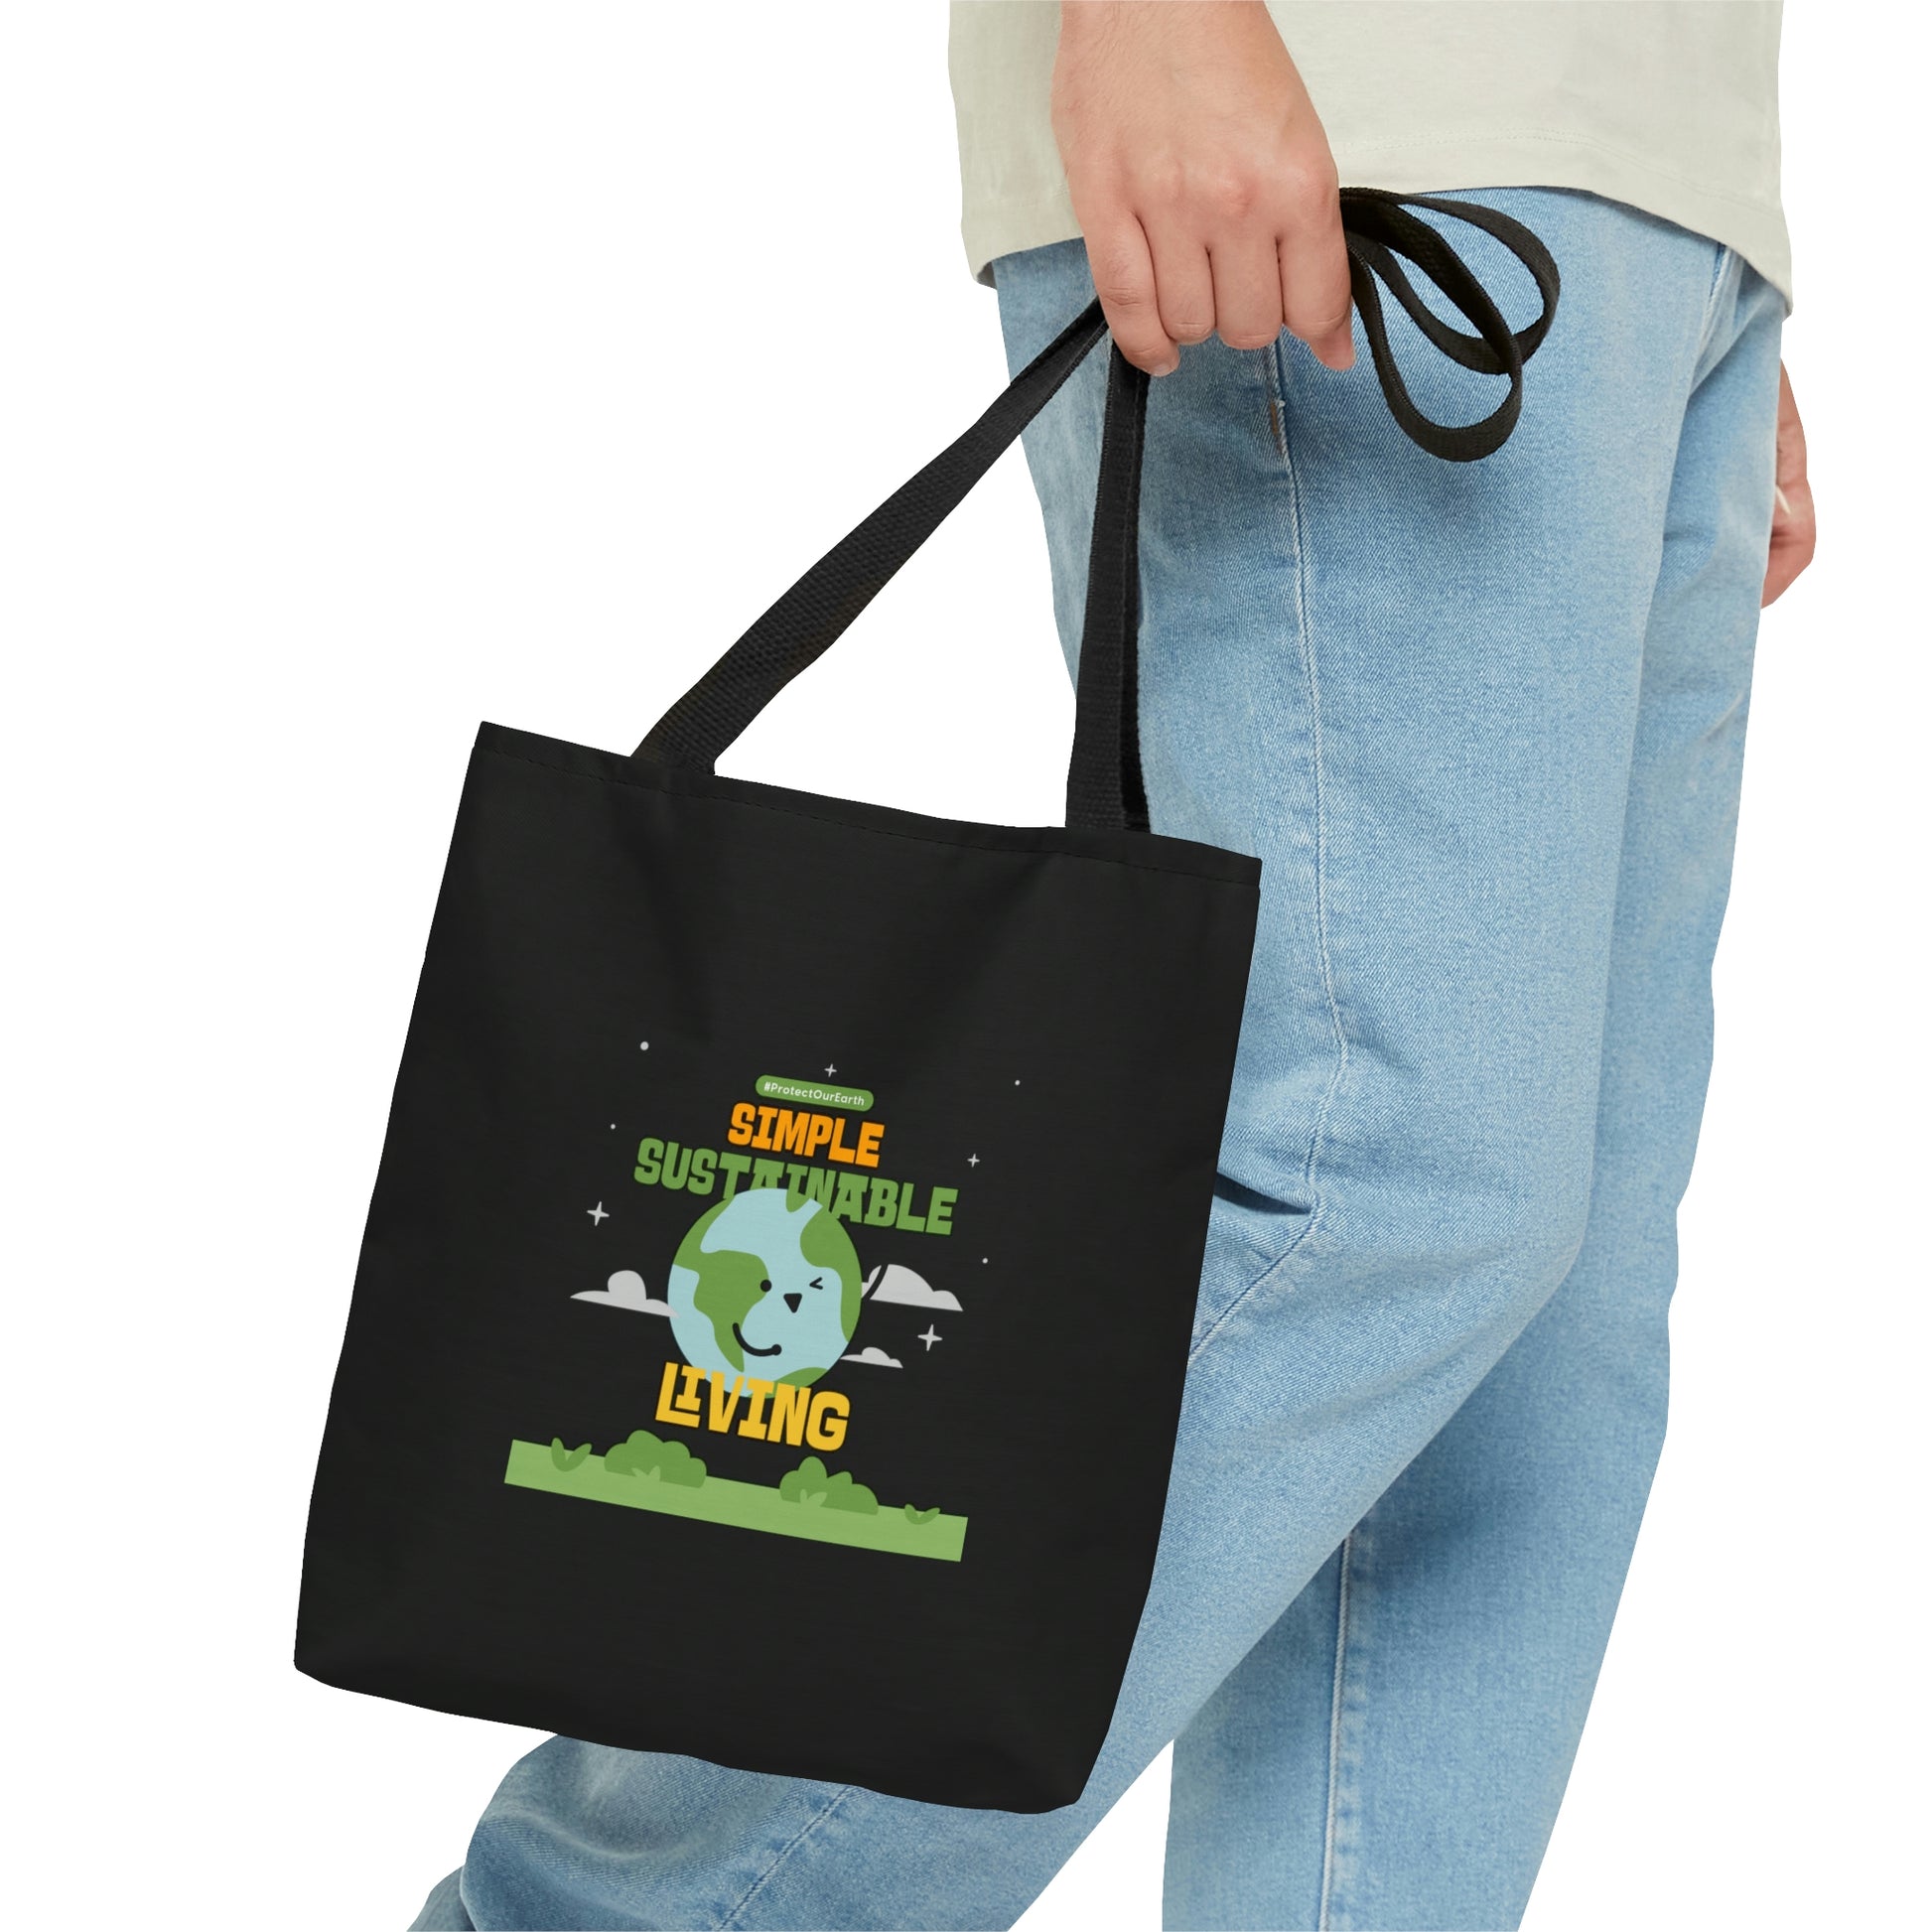 Mock up of a man carrying the small tote bag